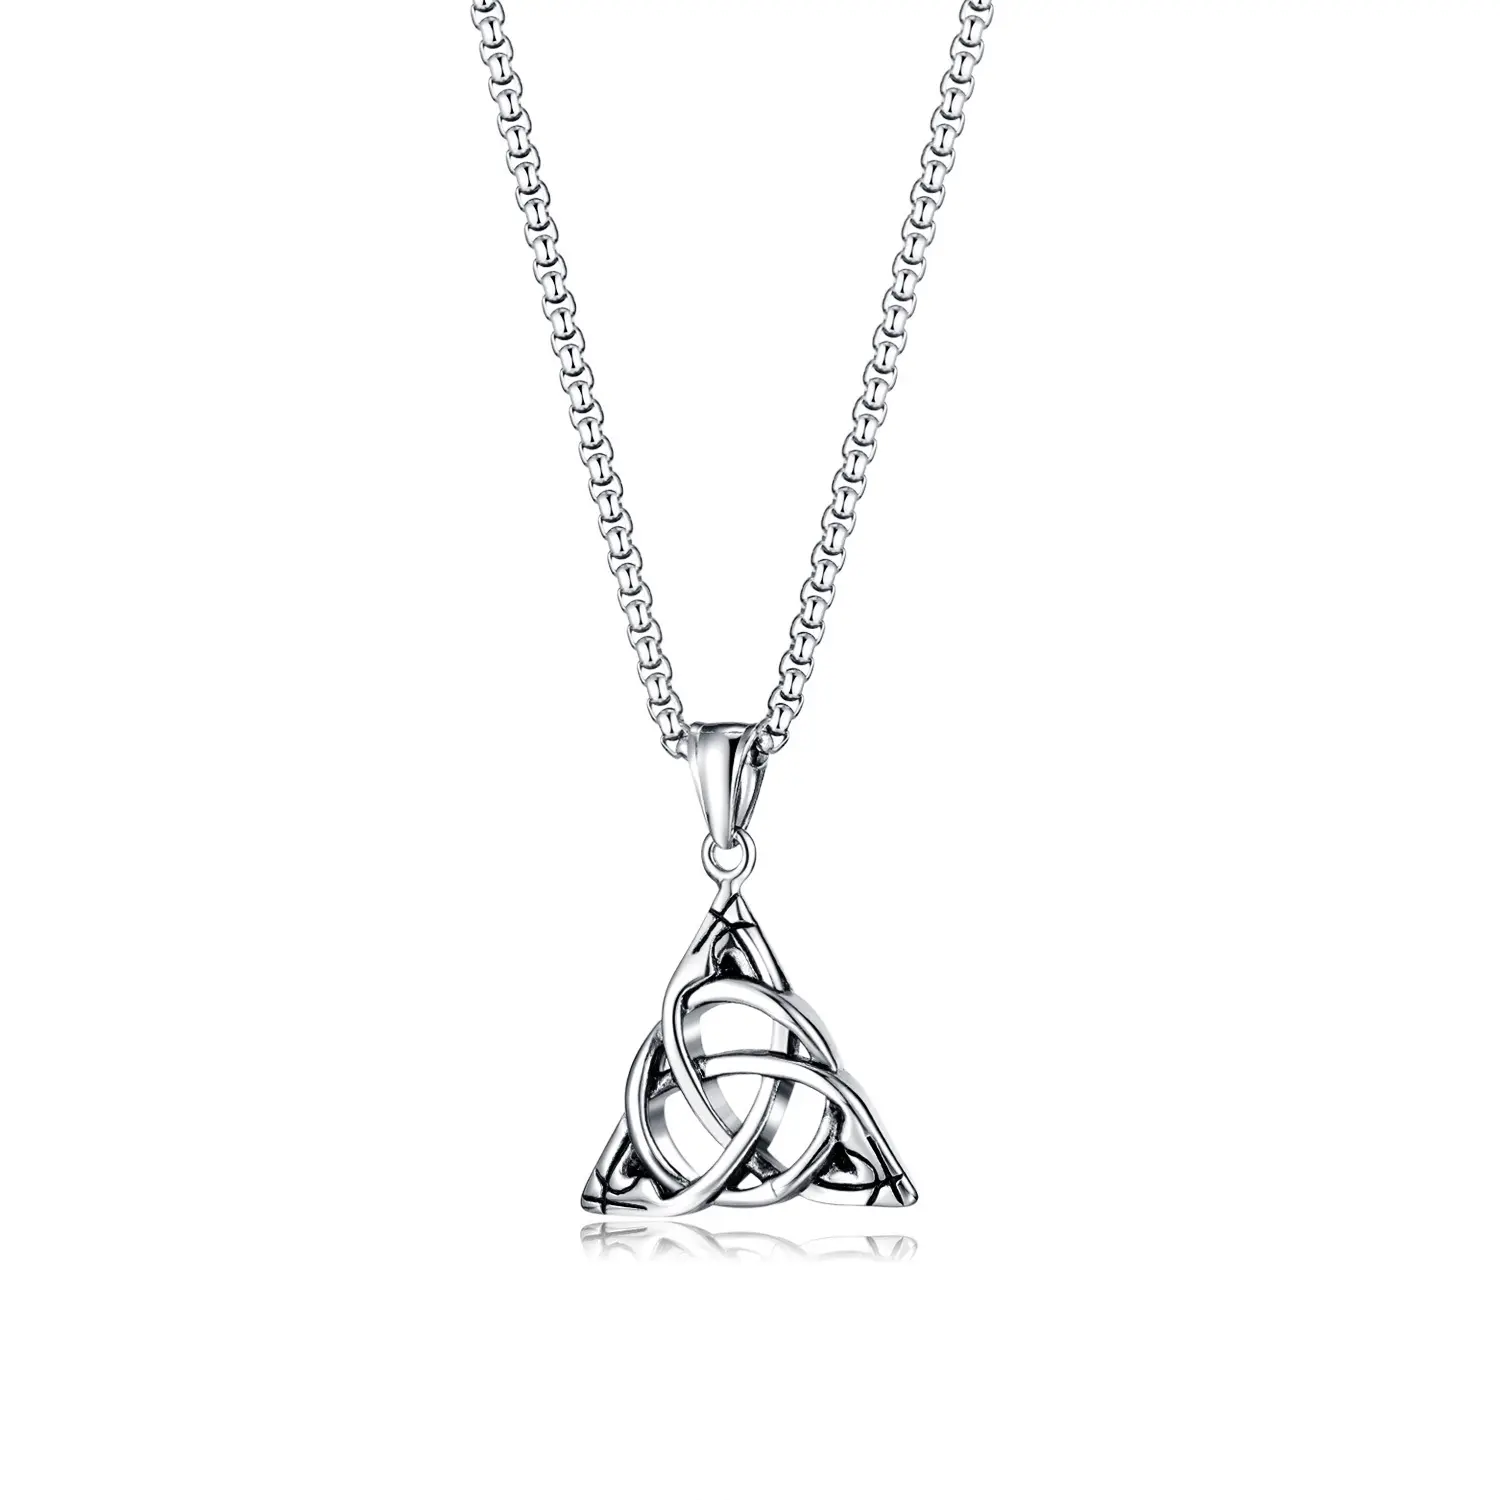 New fashion stainless steel ireland knot celtic triangle pendant necklace